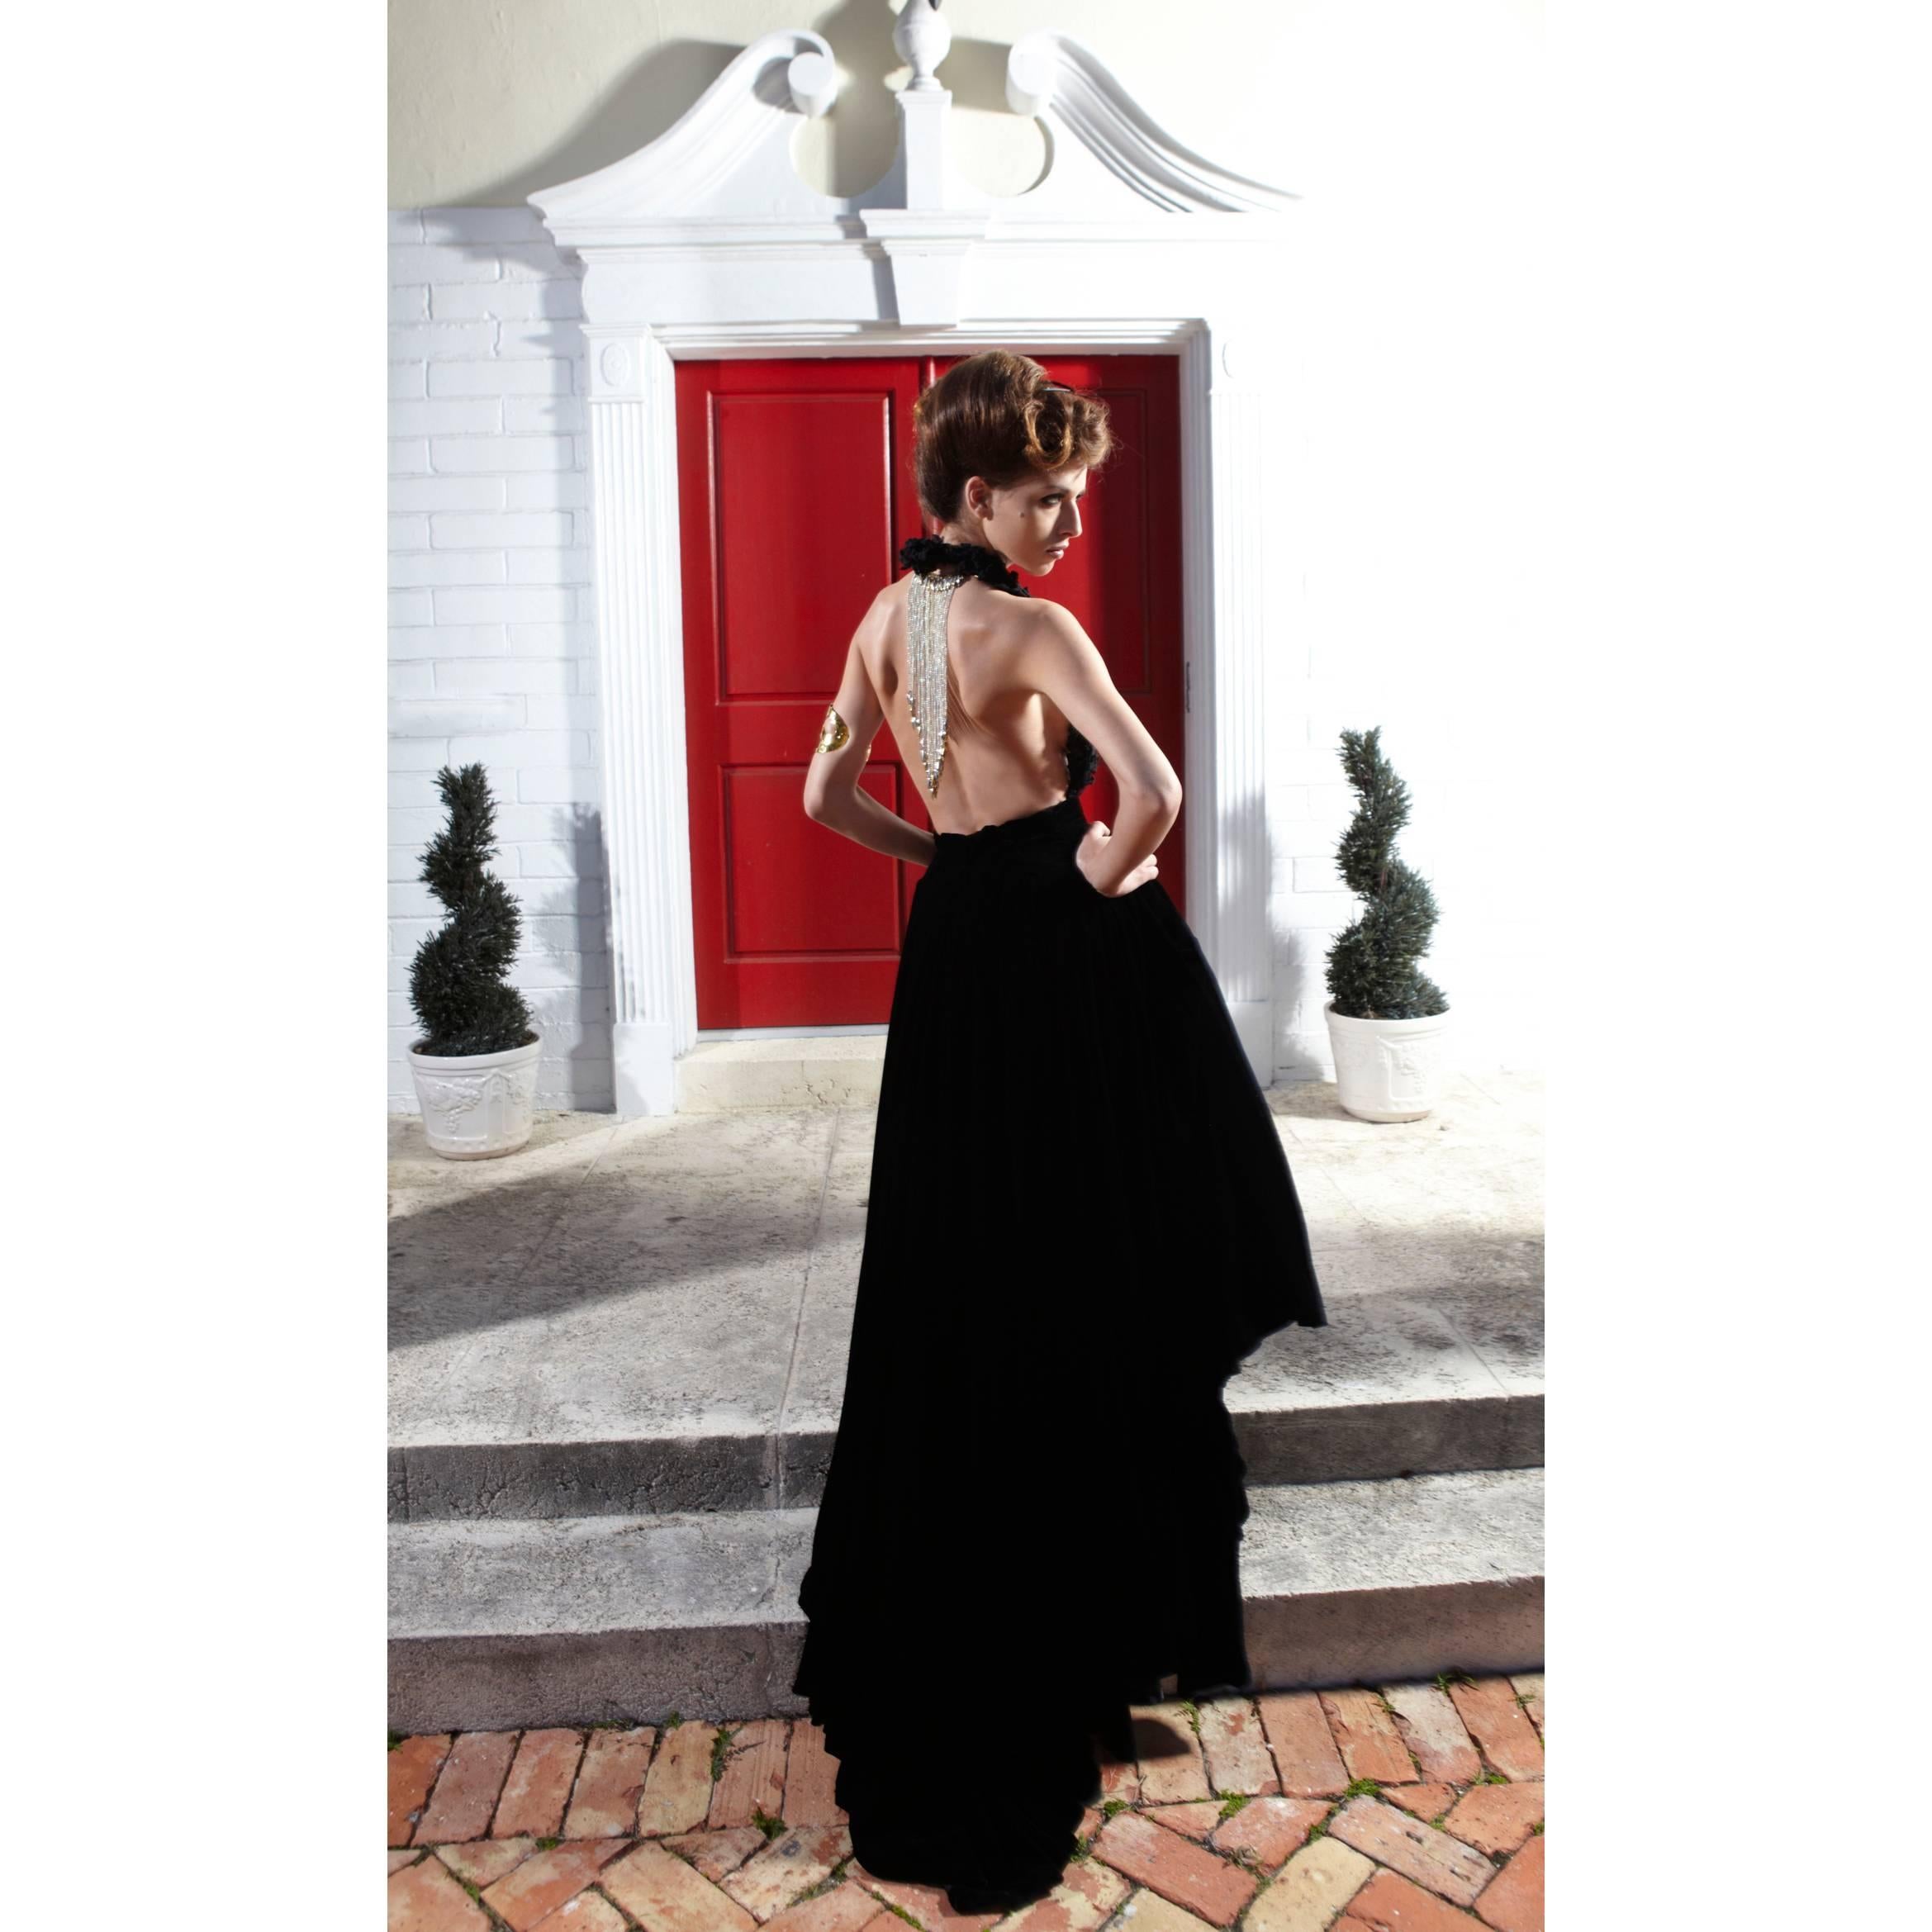 90s Custom Black Velvet Evening Skirt with Train.
Only available to Feb.28th.
Custom made by Alberti & Bird - Taylor for Theaters and Opera in Hamburg Germany.
The high end velvet is used for stage use and doesn't collect very much of dirt.
It was